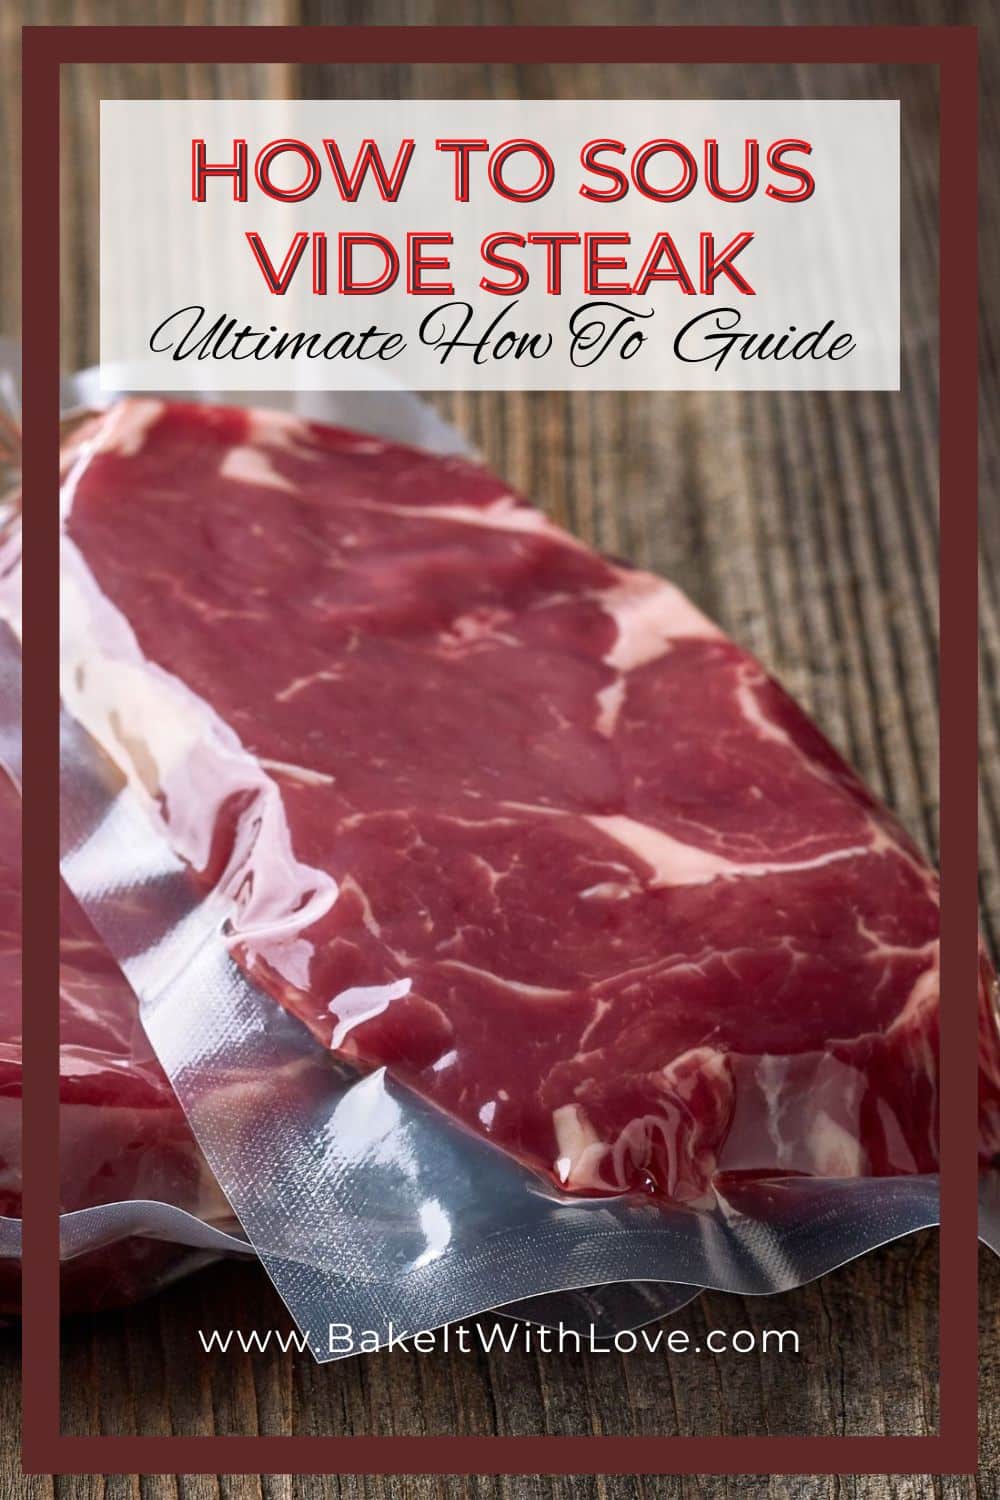 How To Sous Vide Steak: A Guide With Tips, Tricks, & More